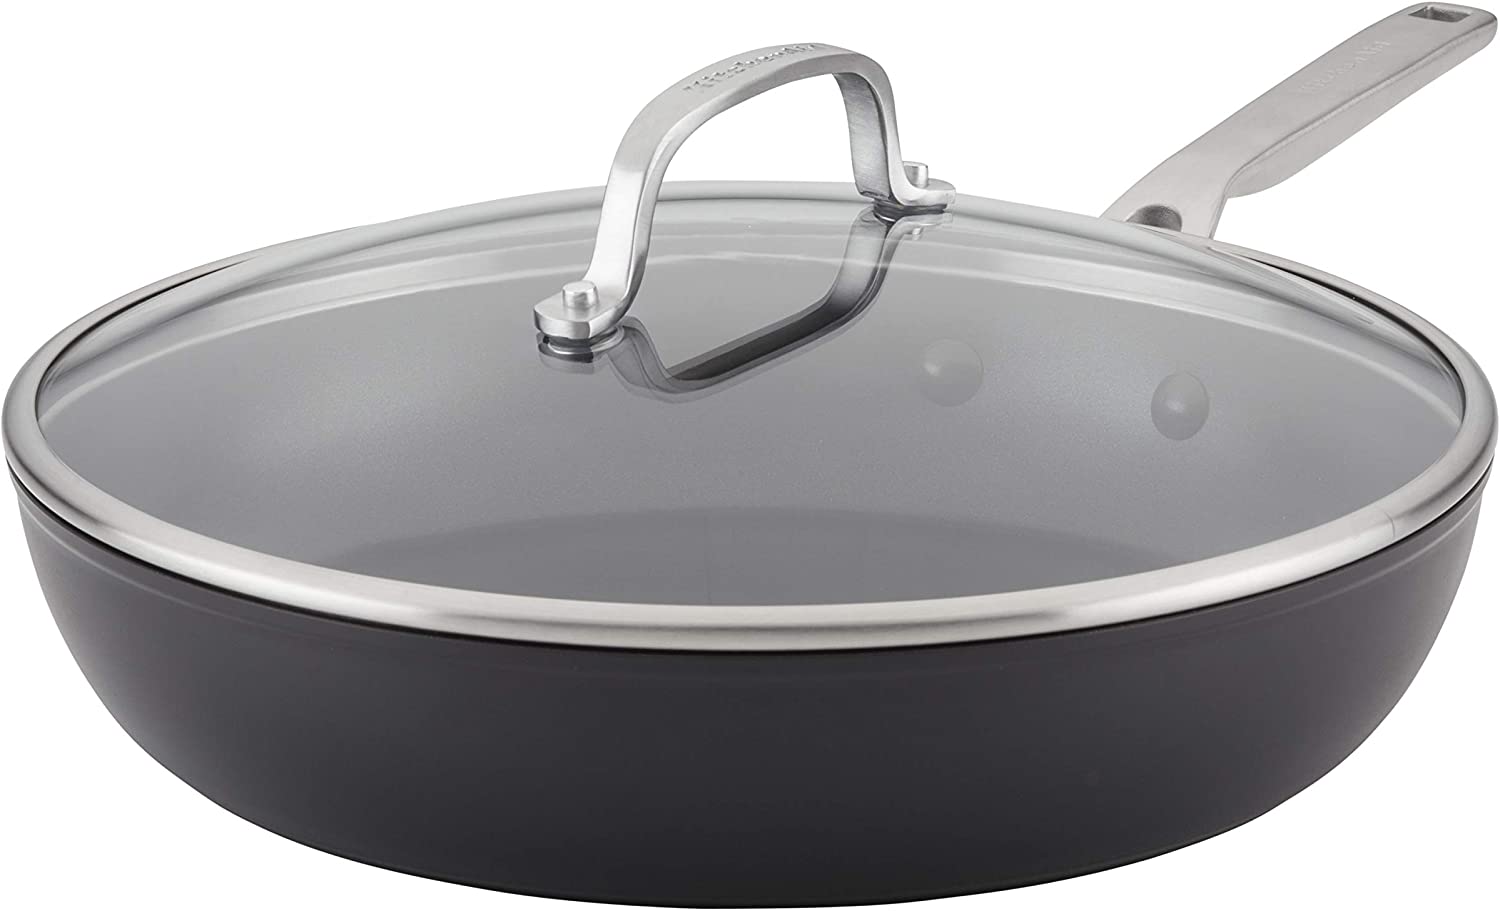 KitchenAid 12.25 inch frying pan for induction cooktop